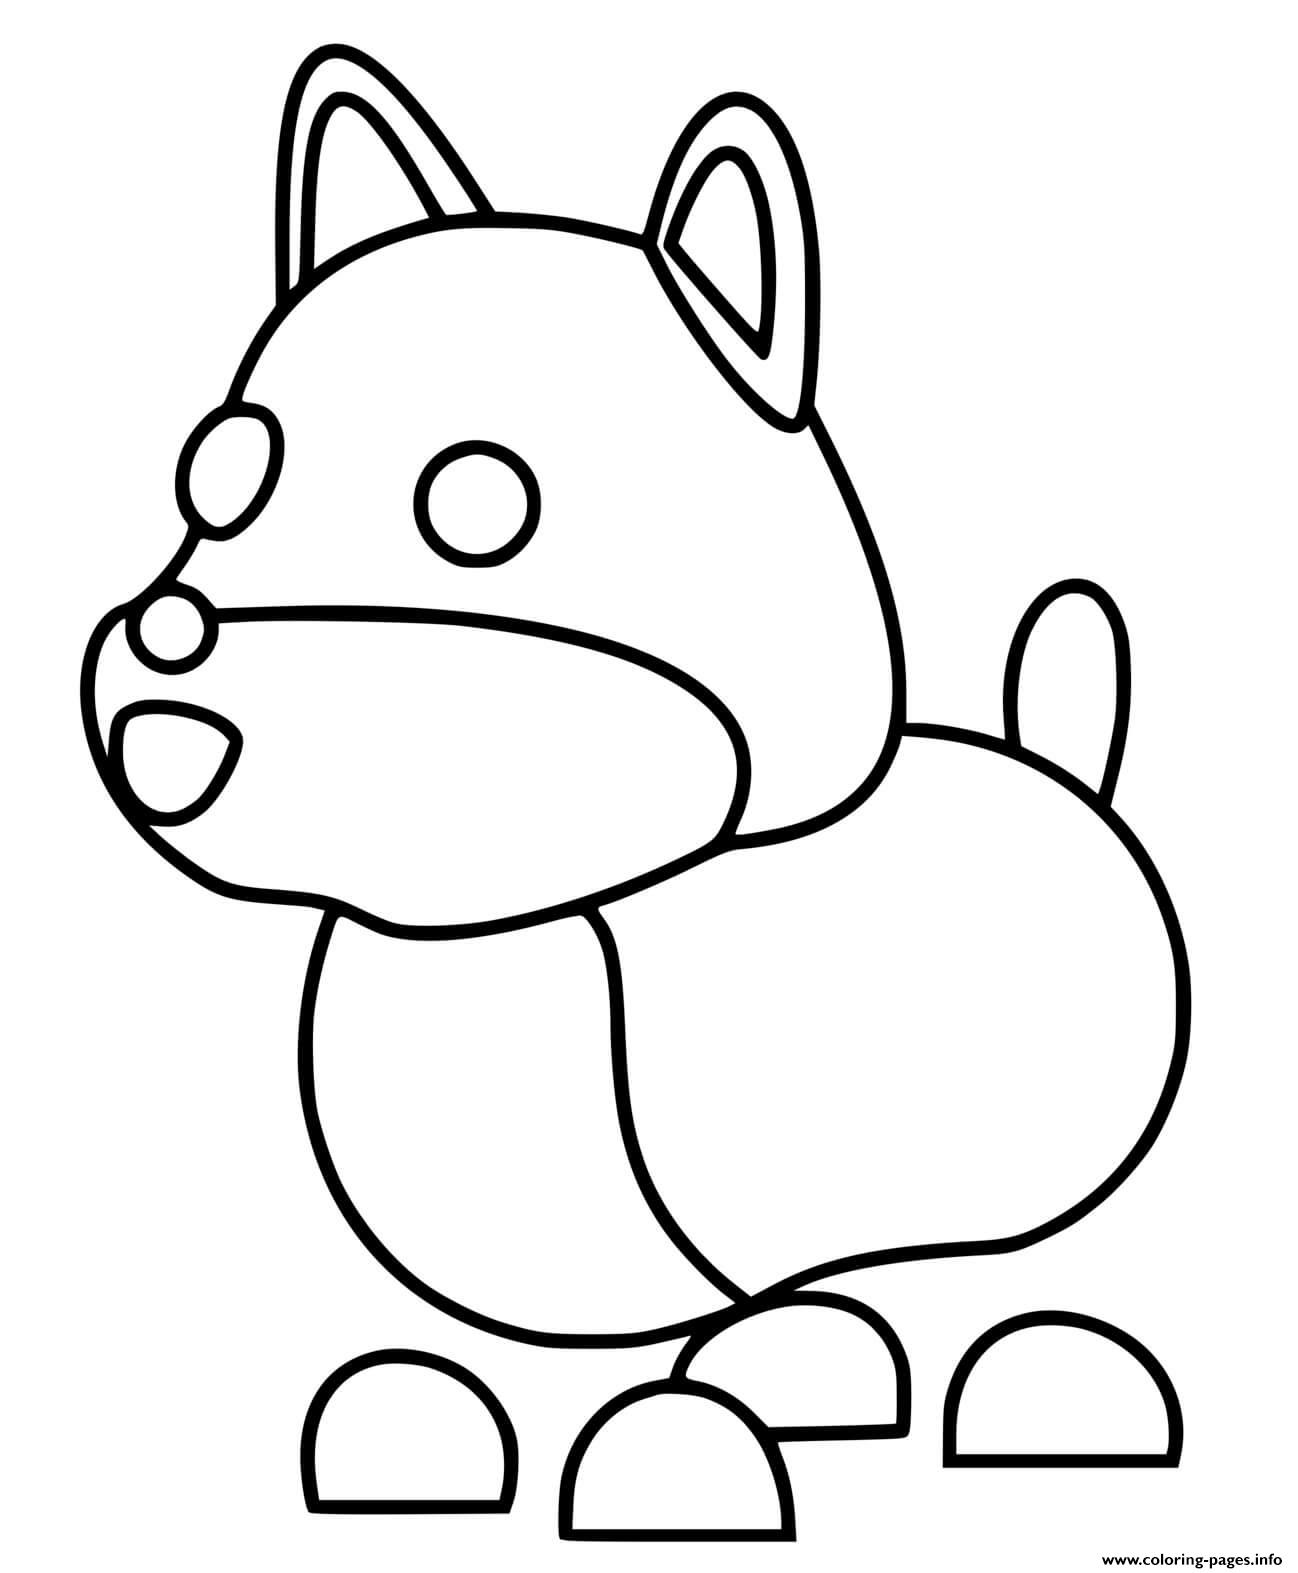 Roblox Adopt Me Shiba Inu Coloring Pages Printable - roblox adopt me pets shiba inu